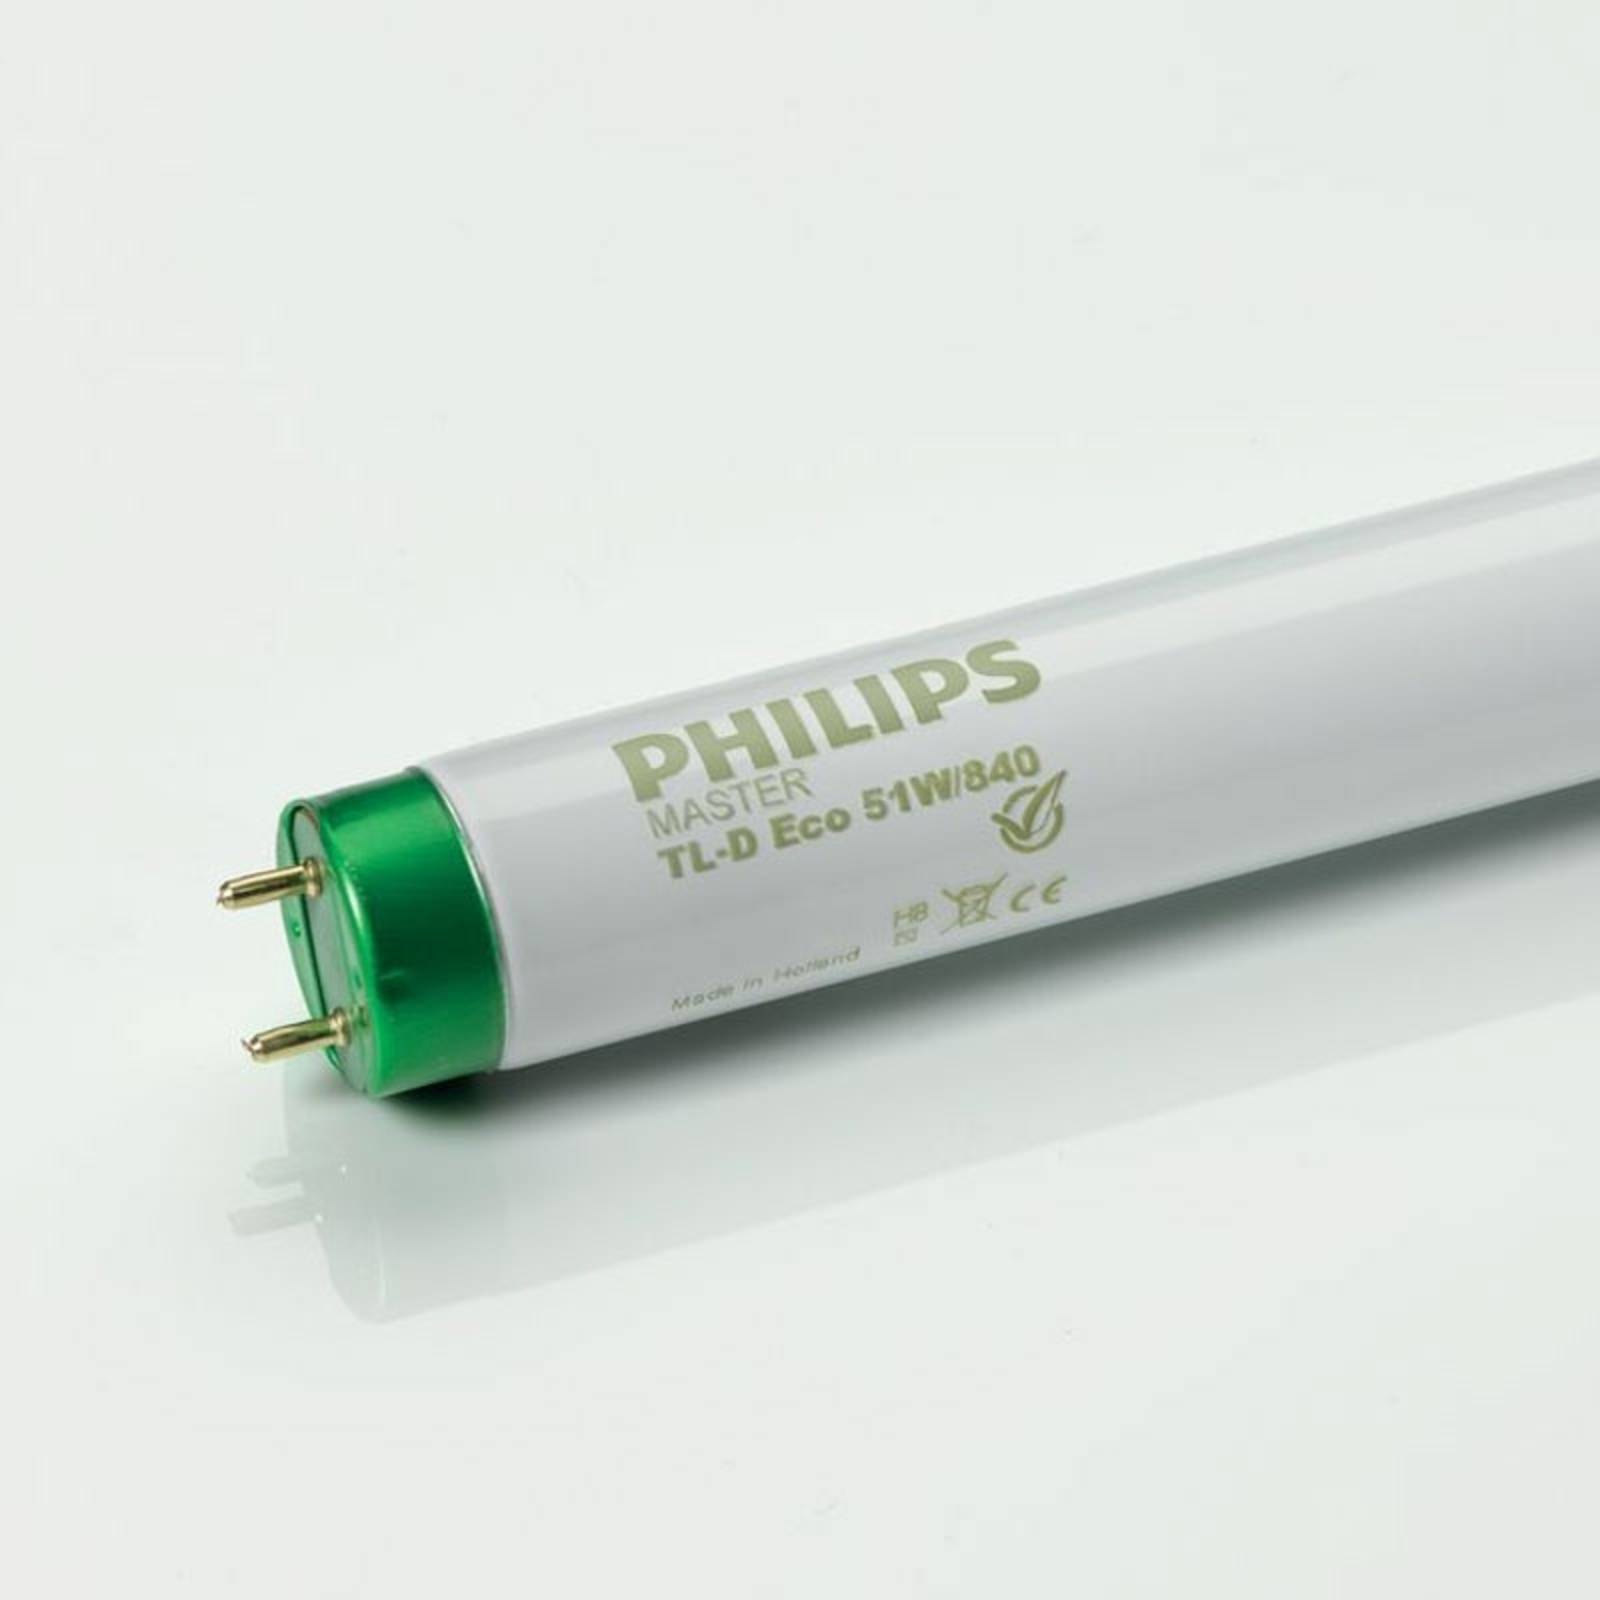 Philips Leuchtstoffröhre G13 T8 Master TL-D Eco 830 51W